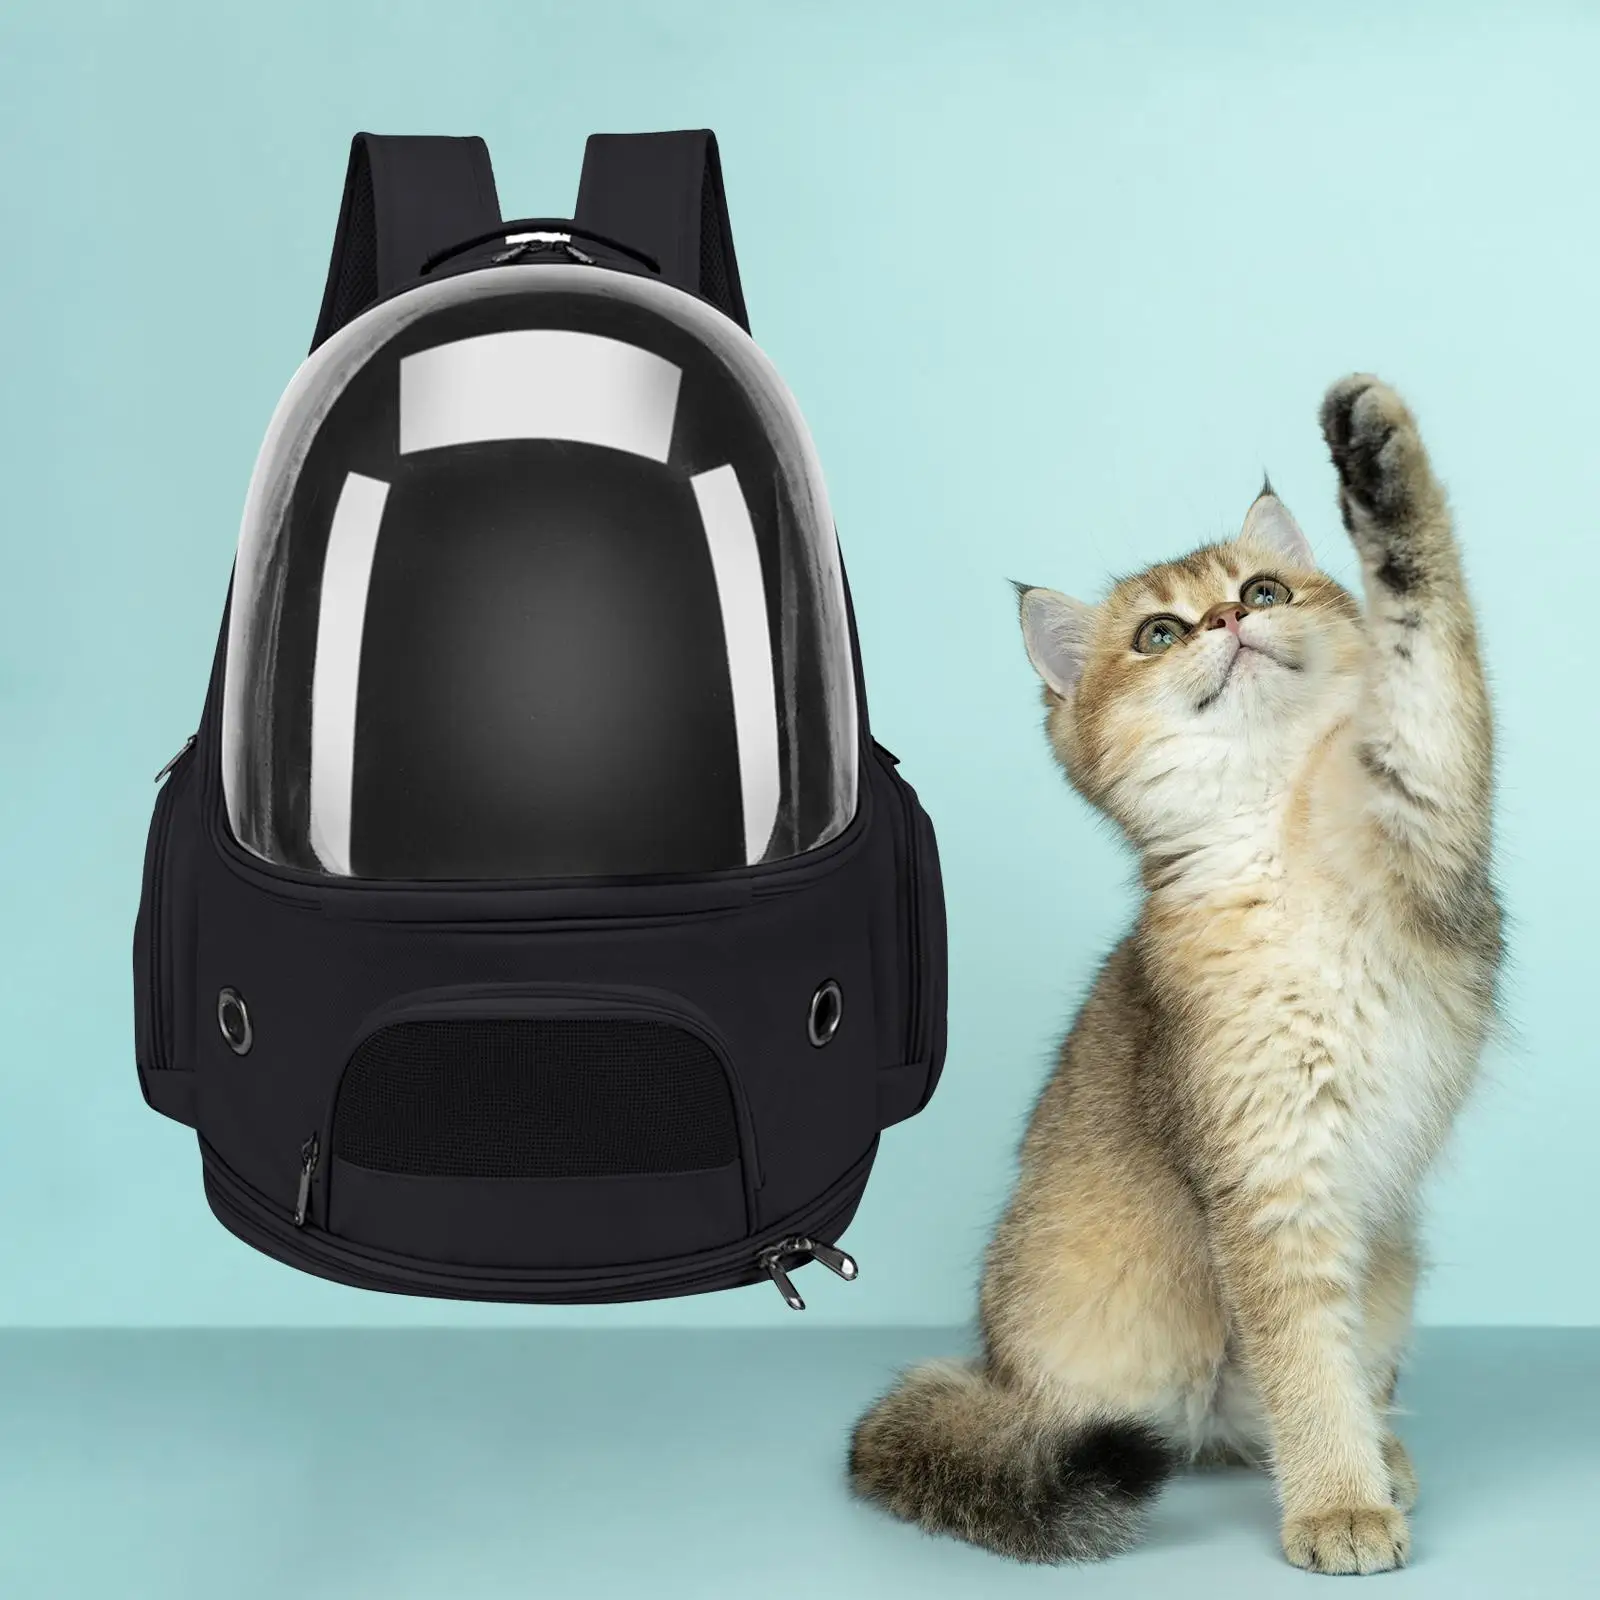 Pet Carrier Backpack for Cats, Bubble Carrying space Capsule Pet Carrier Handbag